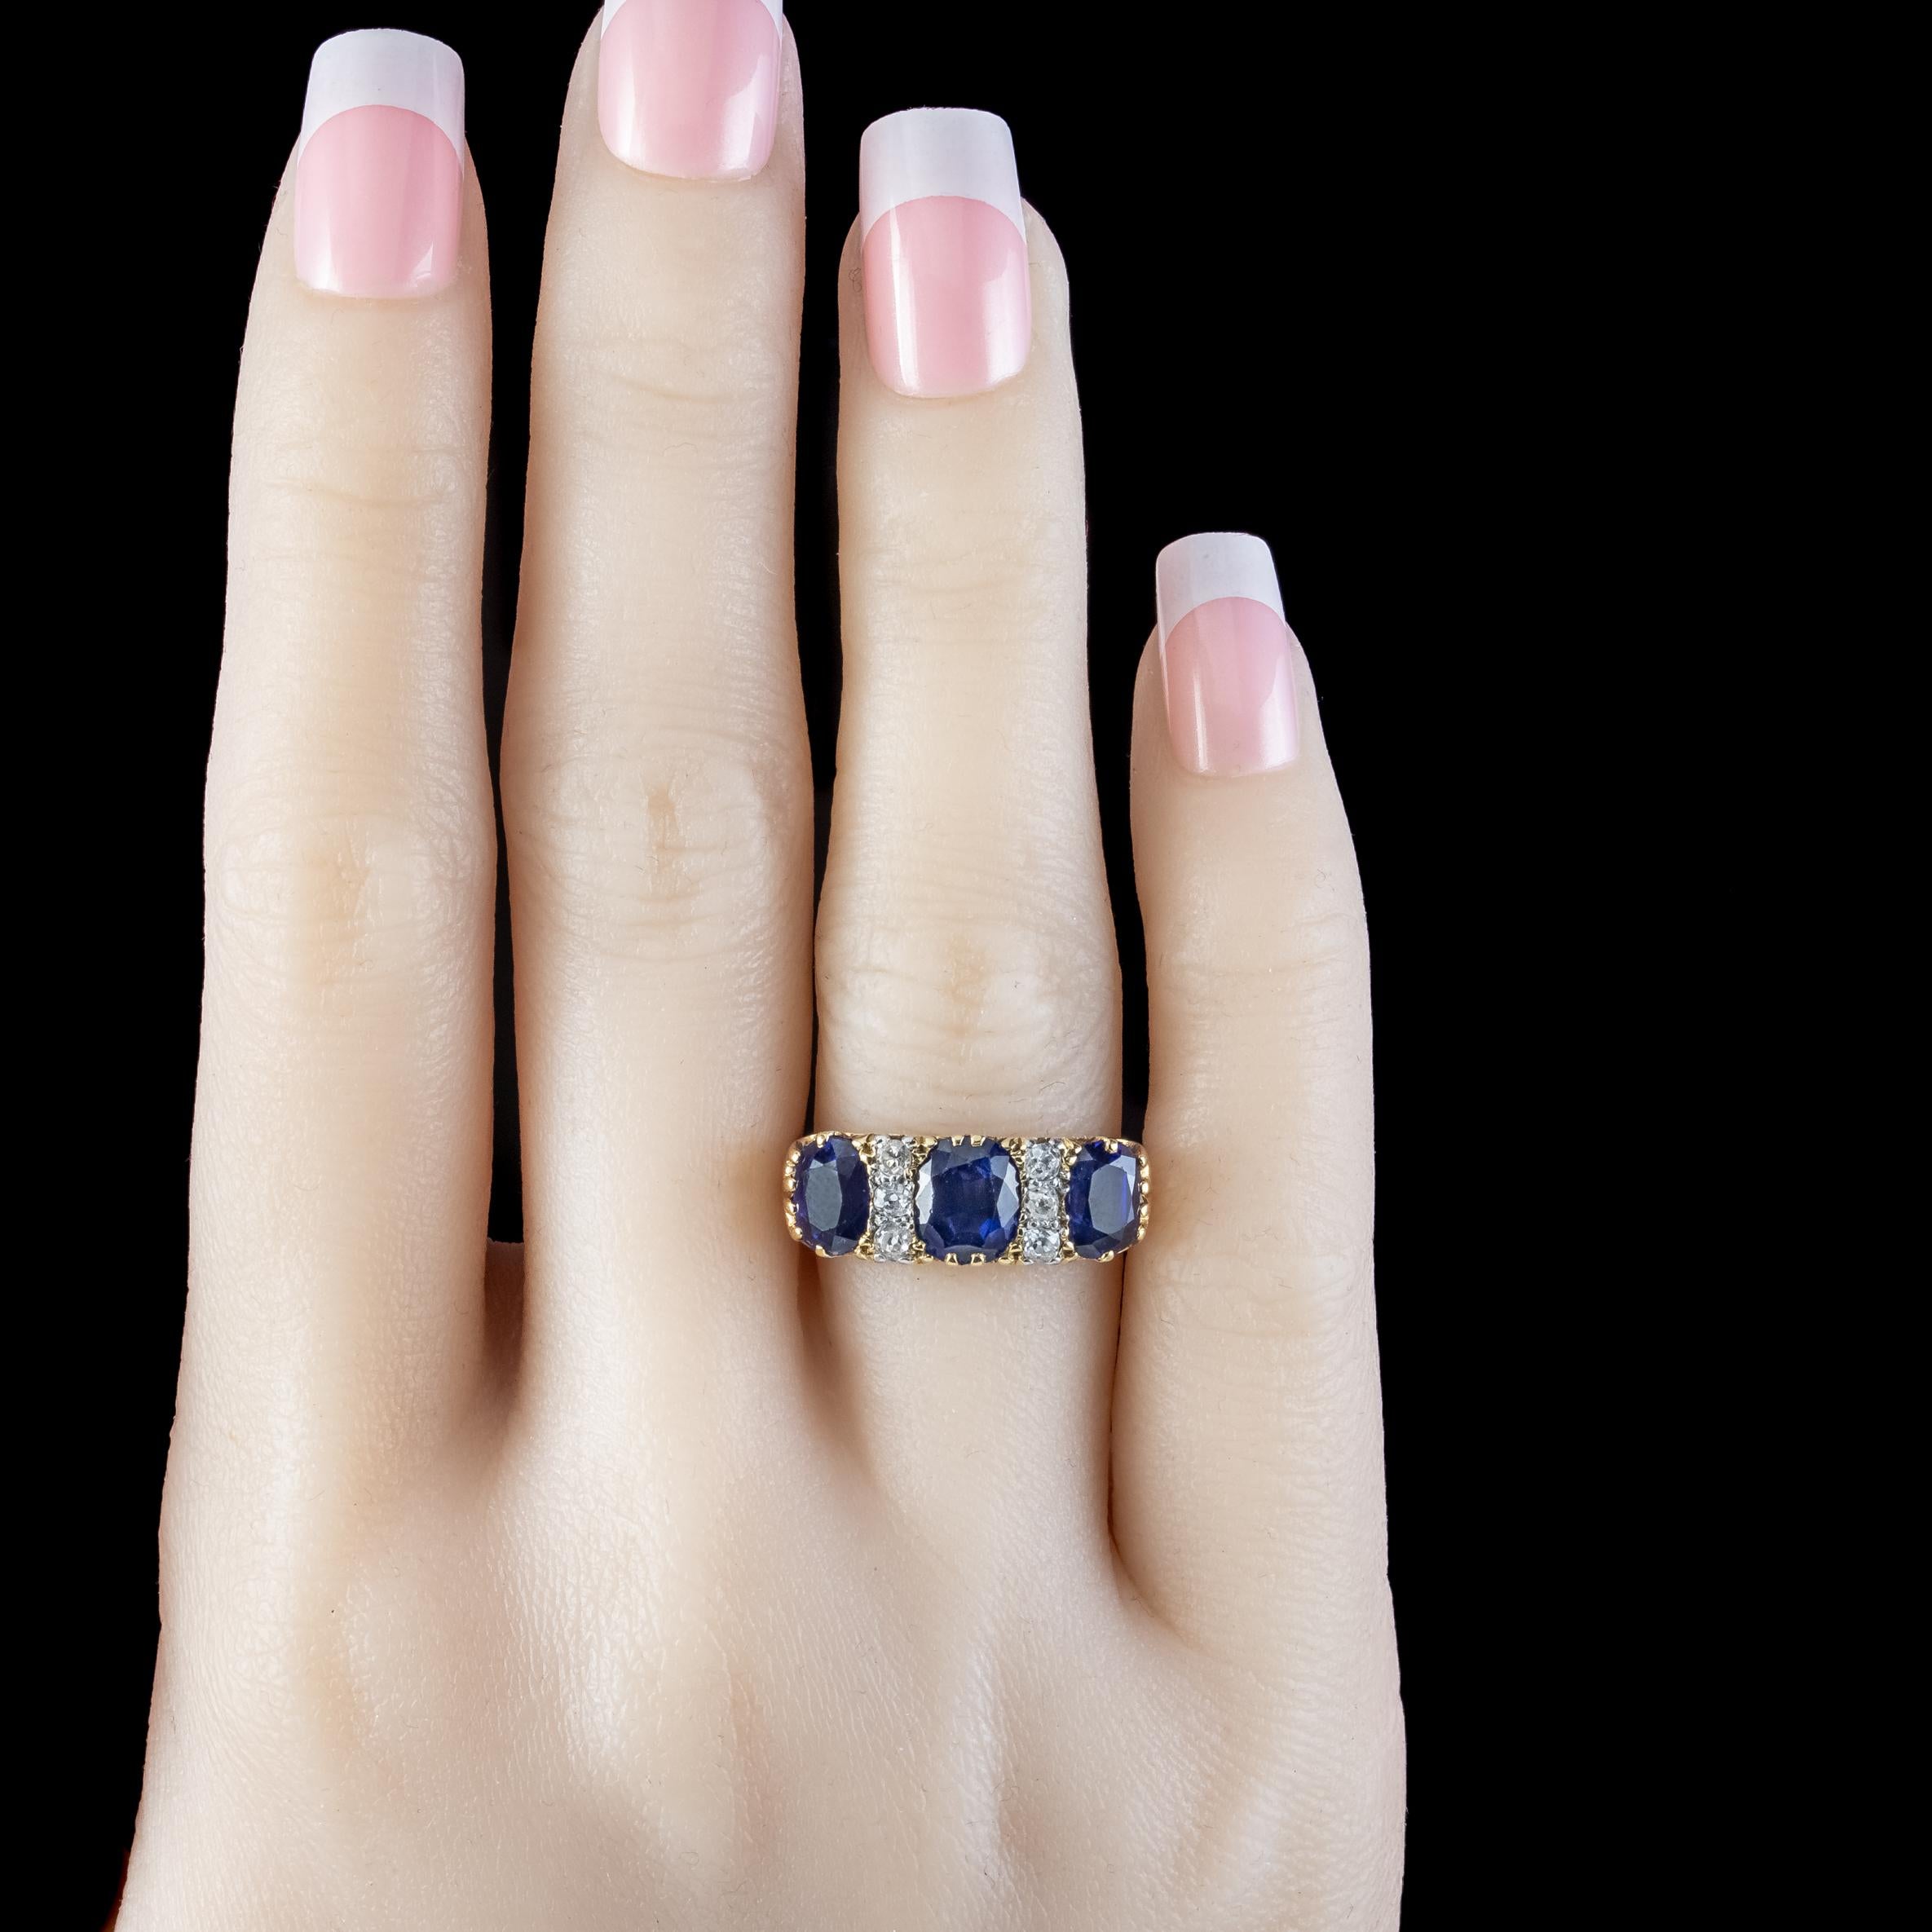 Antique Edwardian Sapphire Diamond Ring 2.7ct Sapphire With Cert For Sale 3